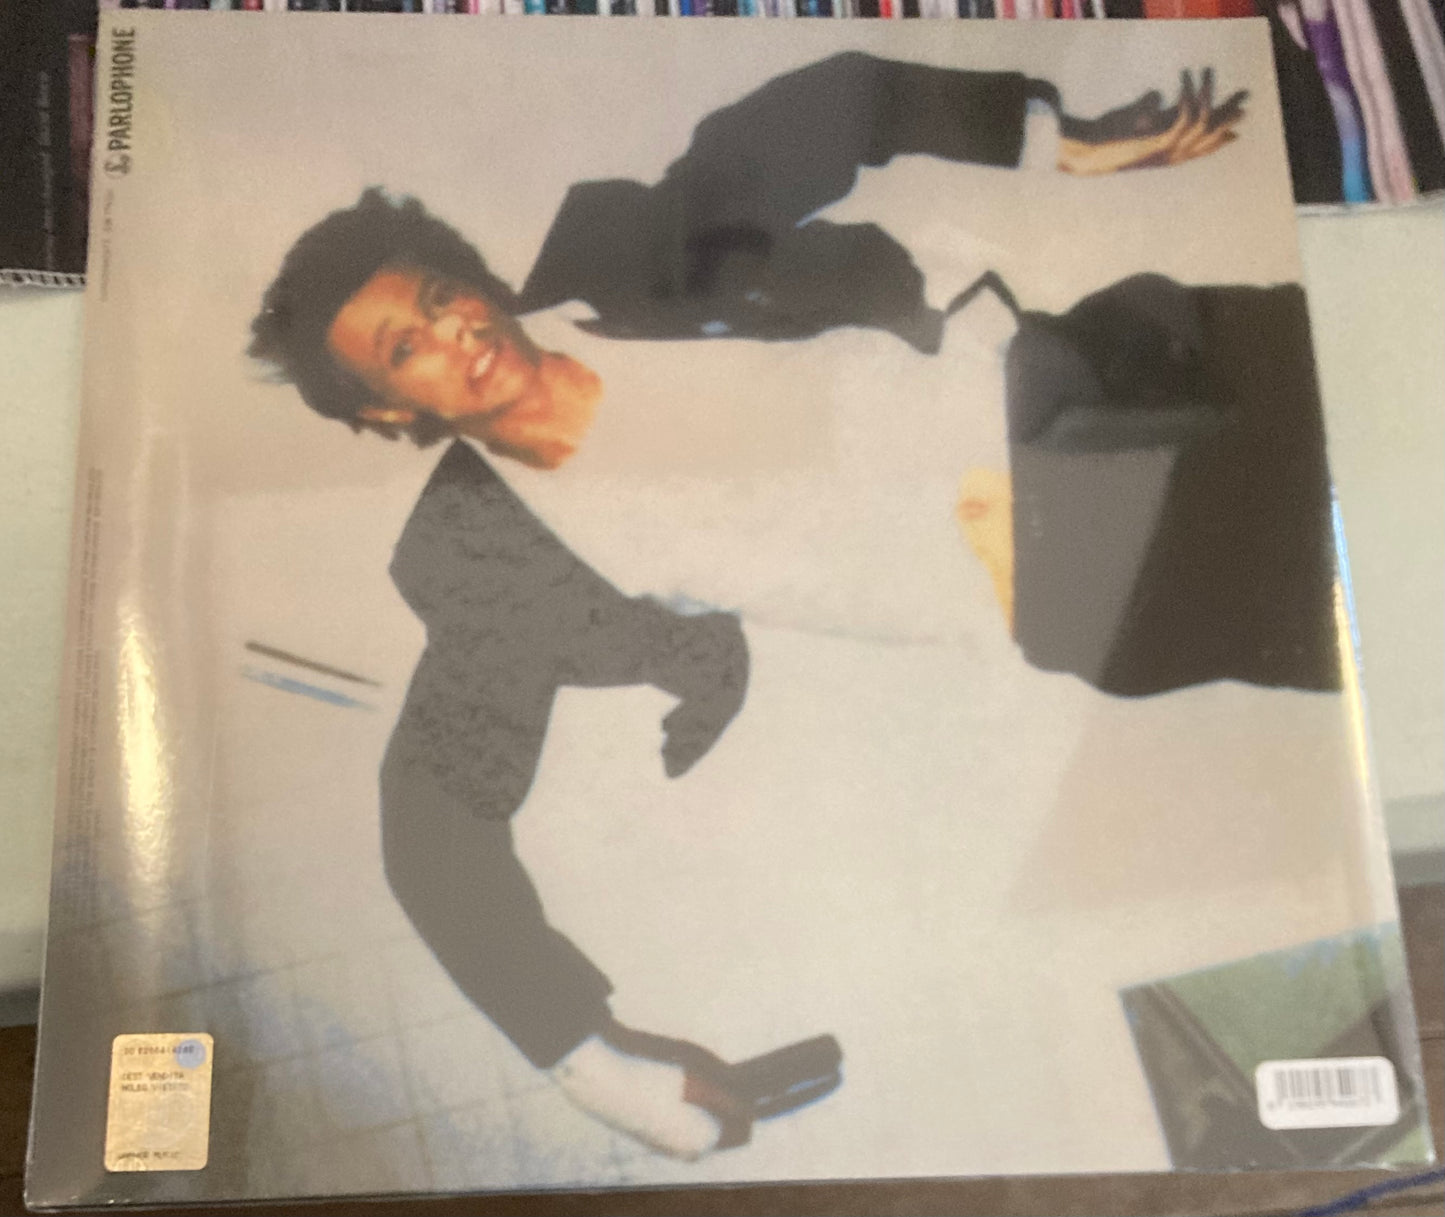 The back of 'David Bowie - Lodger' on vinyl